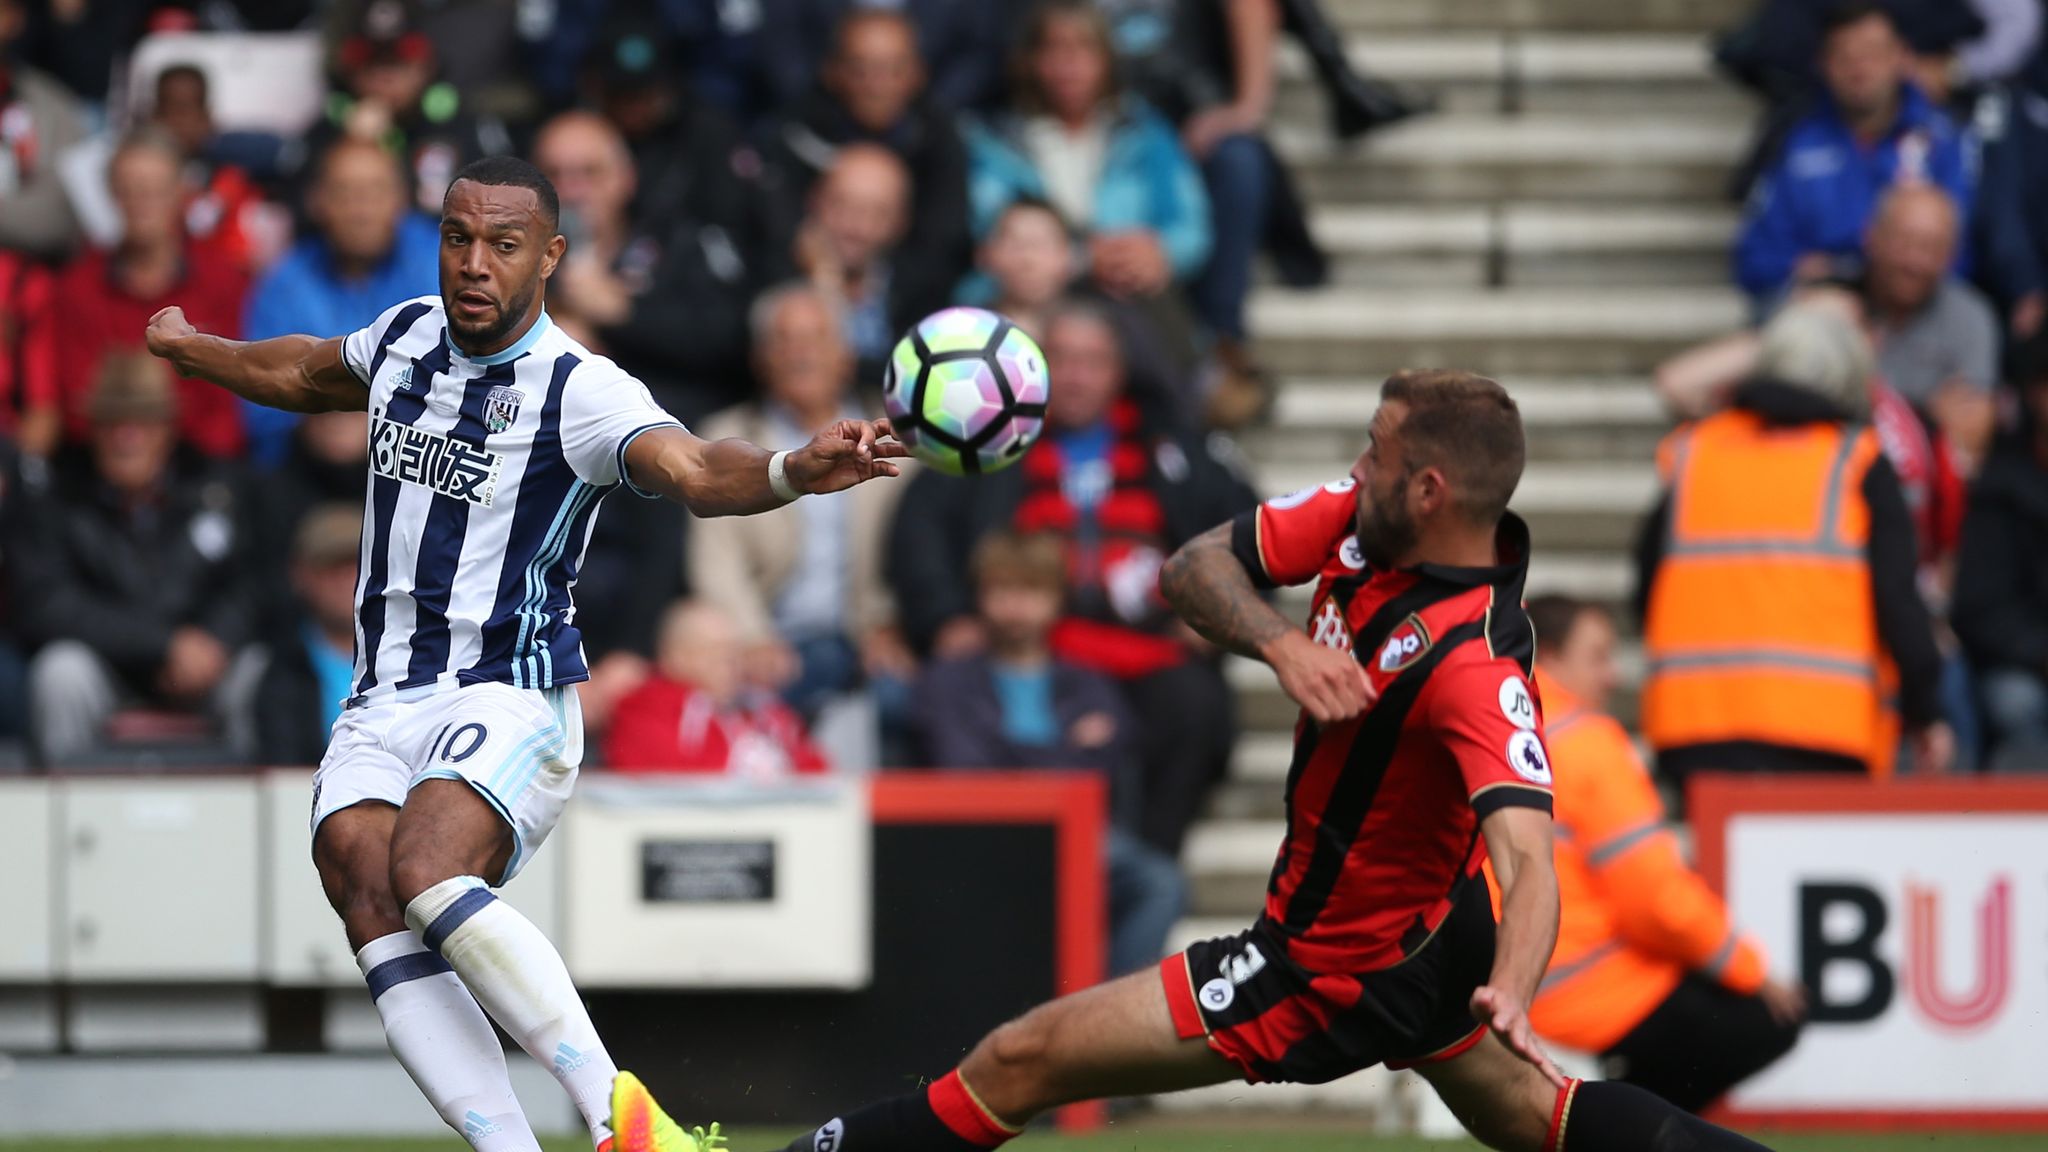 soi-keo-bournemouth-vs-west-bromwich-albion-vao-1h45-ngay-7-8-2021-1